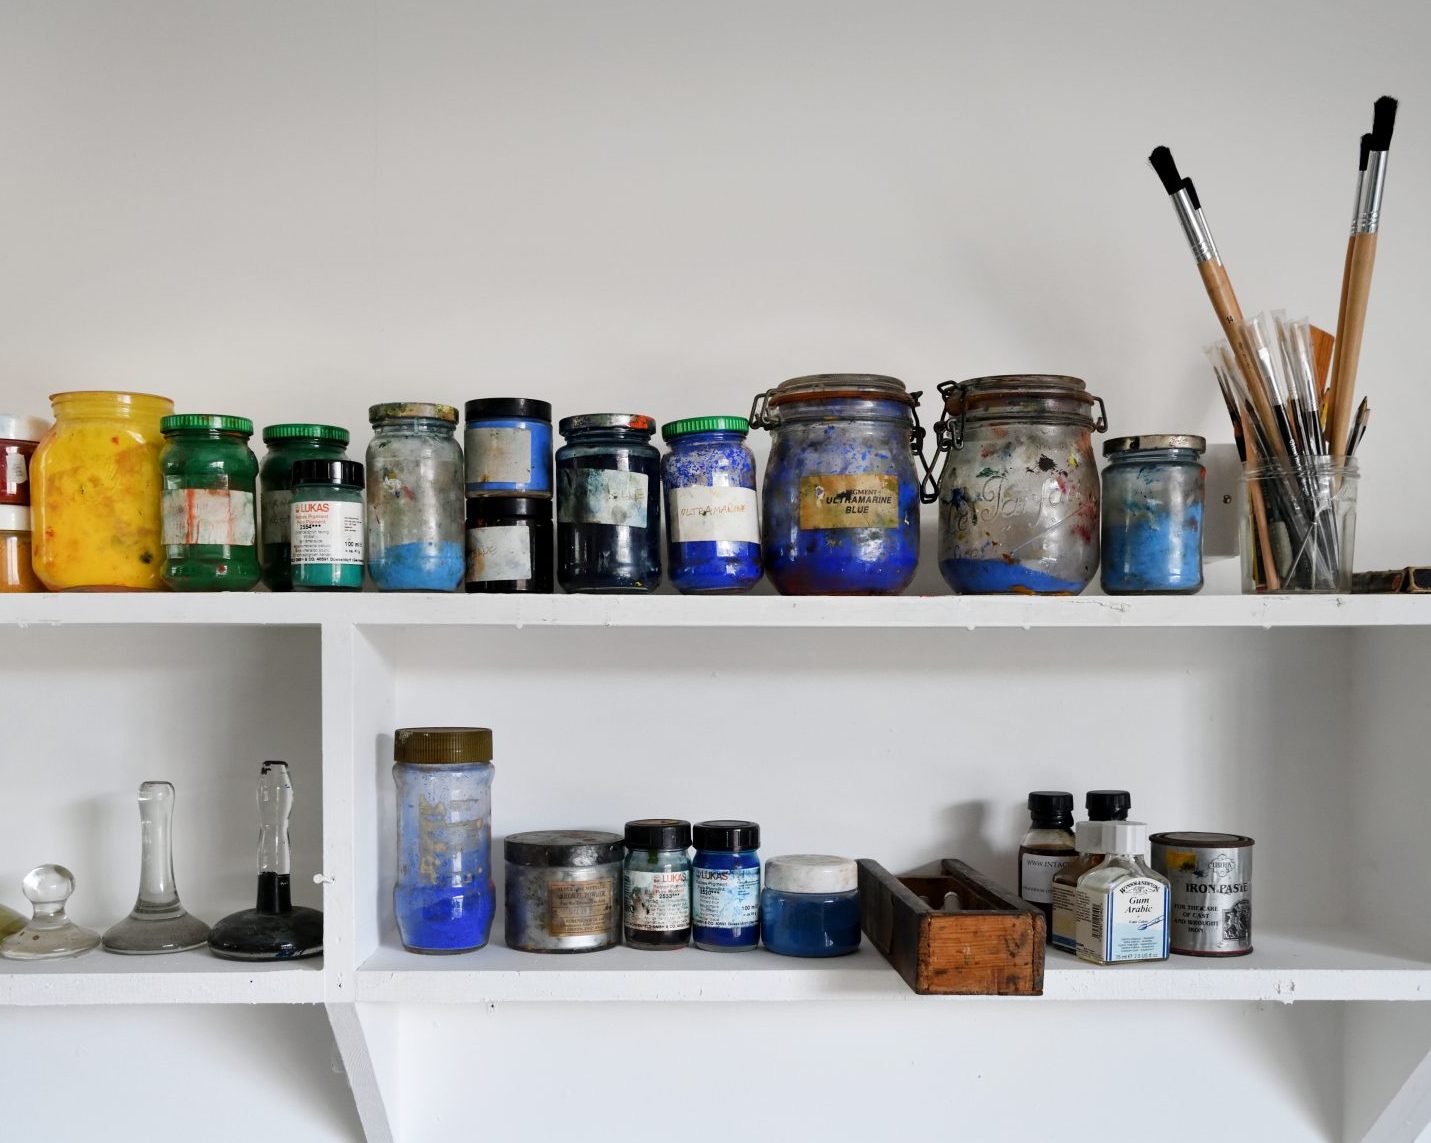 An image of printing ink pots on a white shelf.